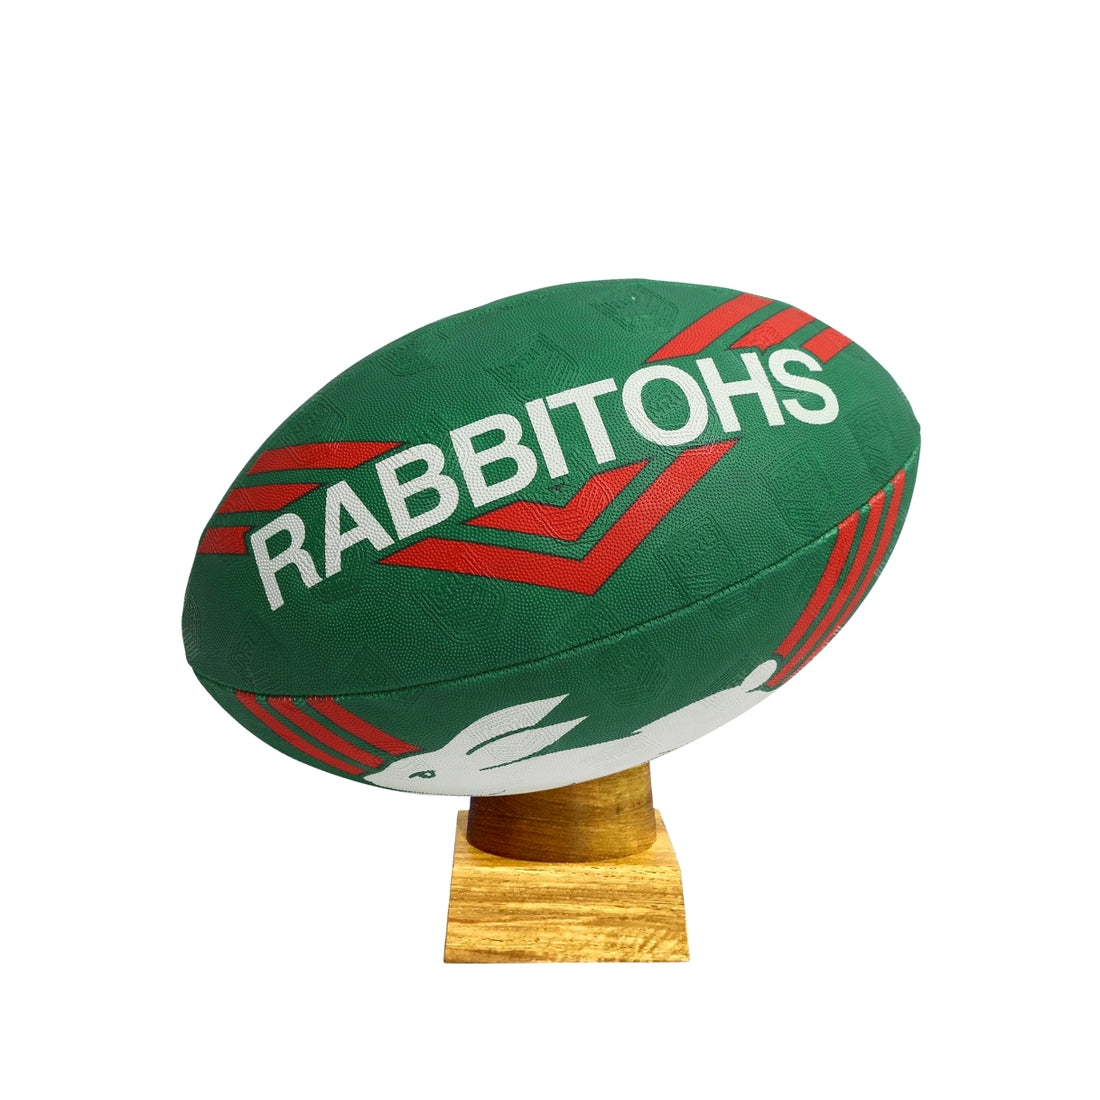 South Sydney Rabbitohs Football Urn for Ashes with personalised timber display stand